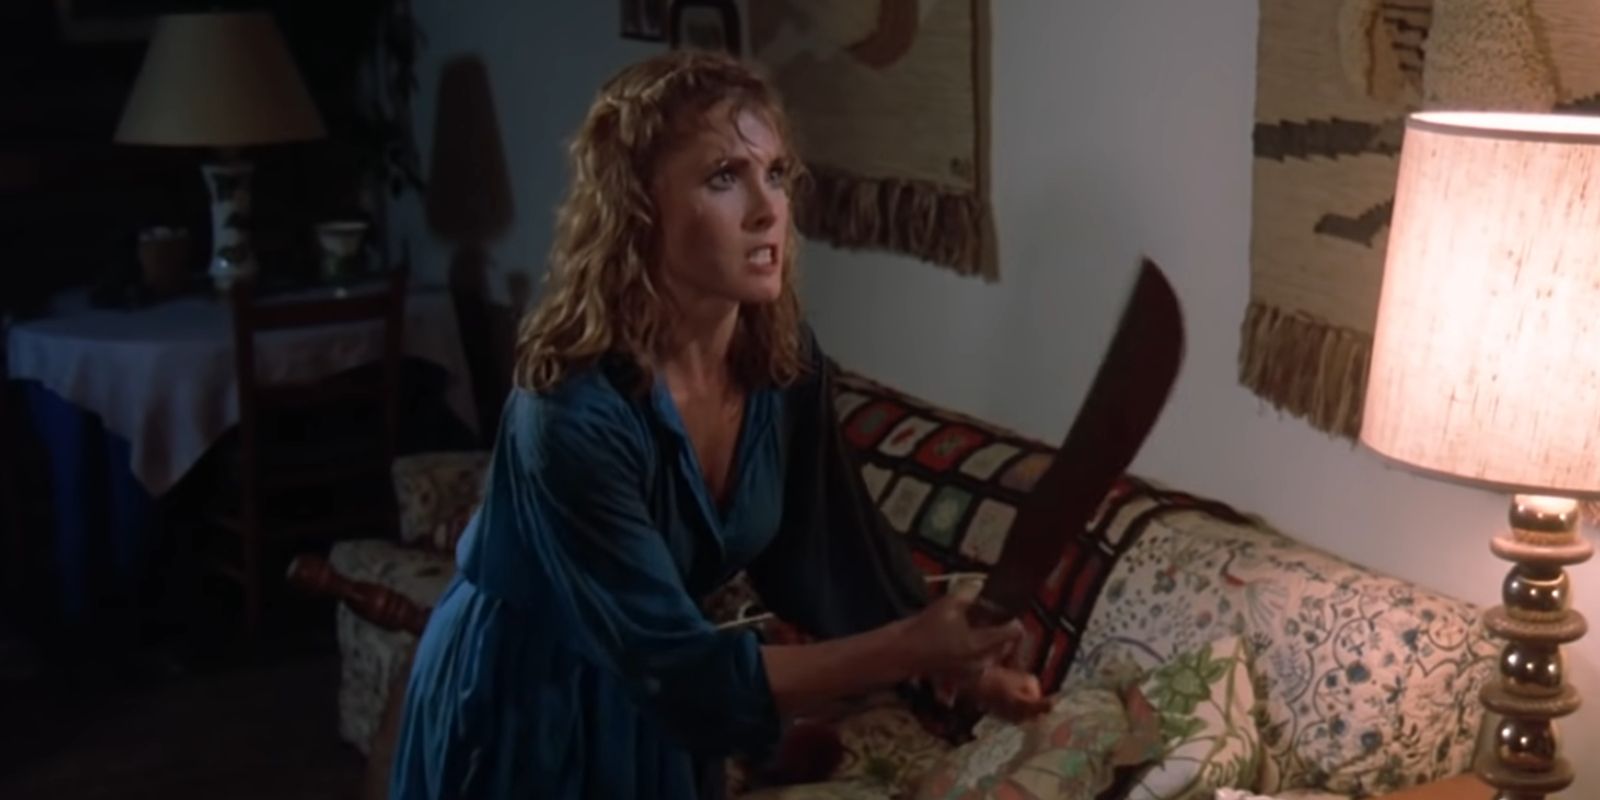 Trish Jarvis Threatening Jason Voorhees With Machete - Friday The 13th Part IV The Final Chapter